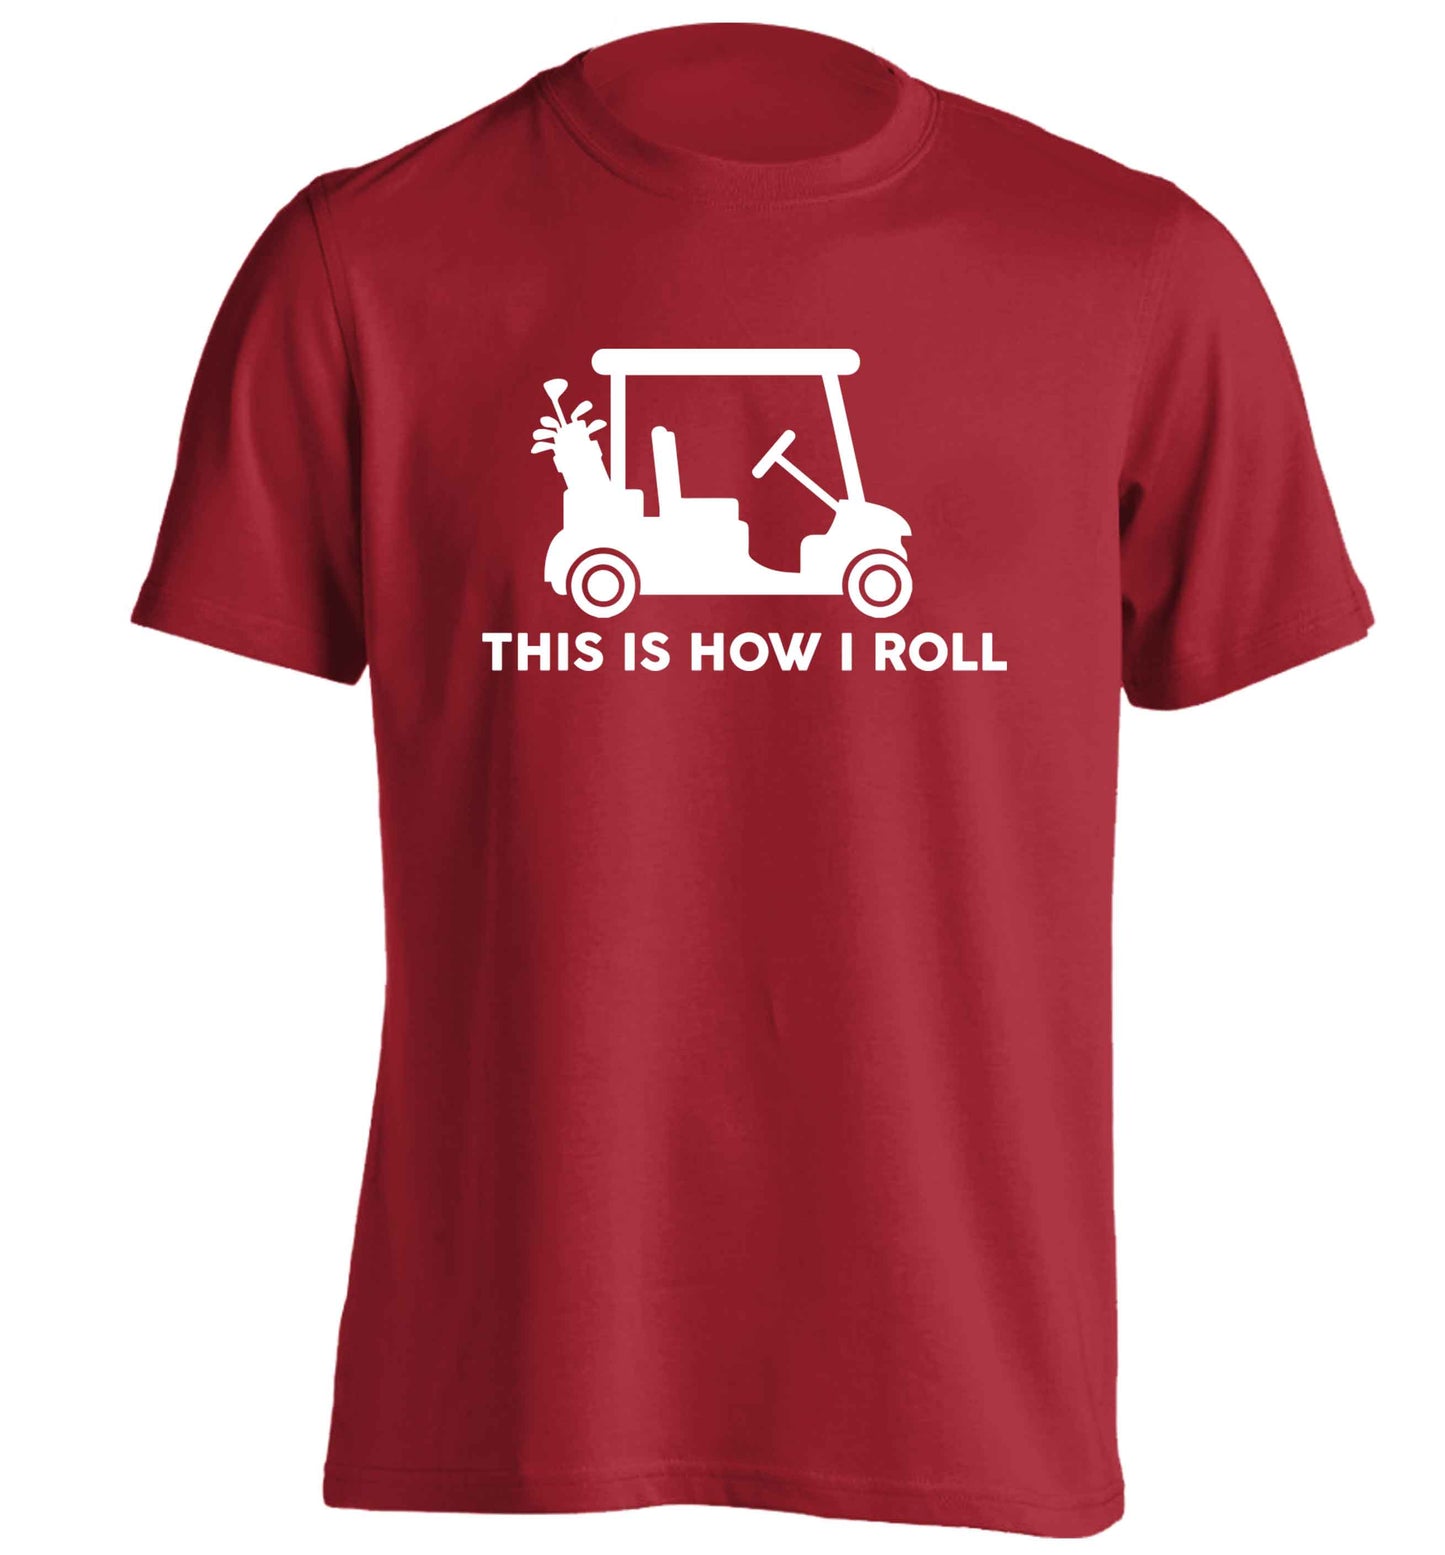 This is how I roll golf cart adults unisex red Tshirt 2XL